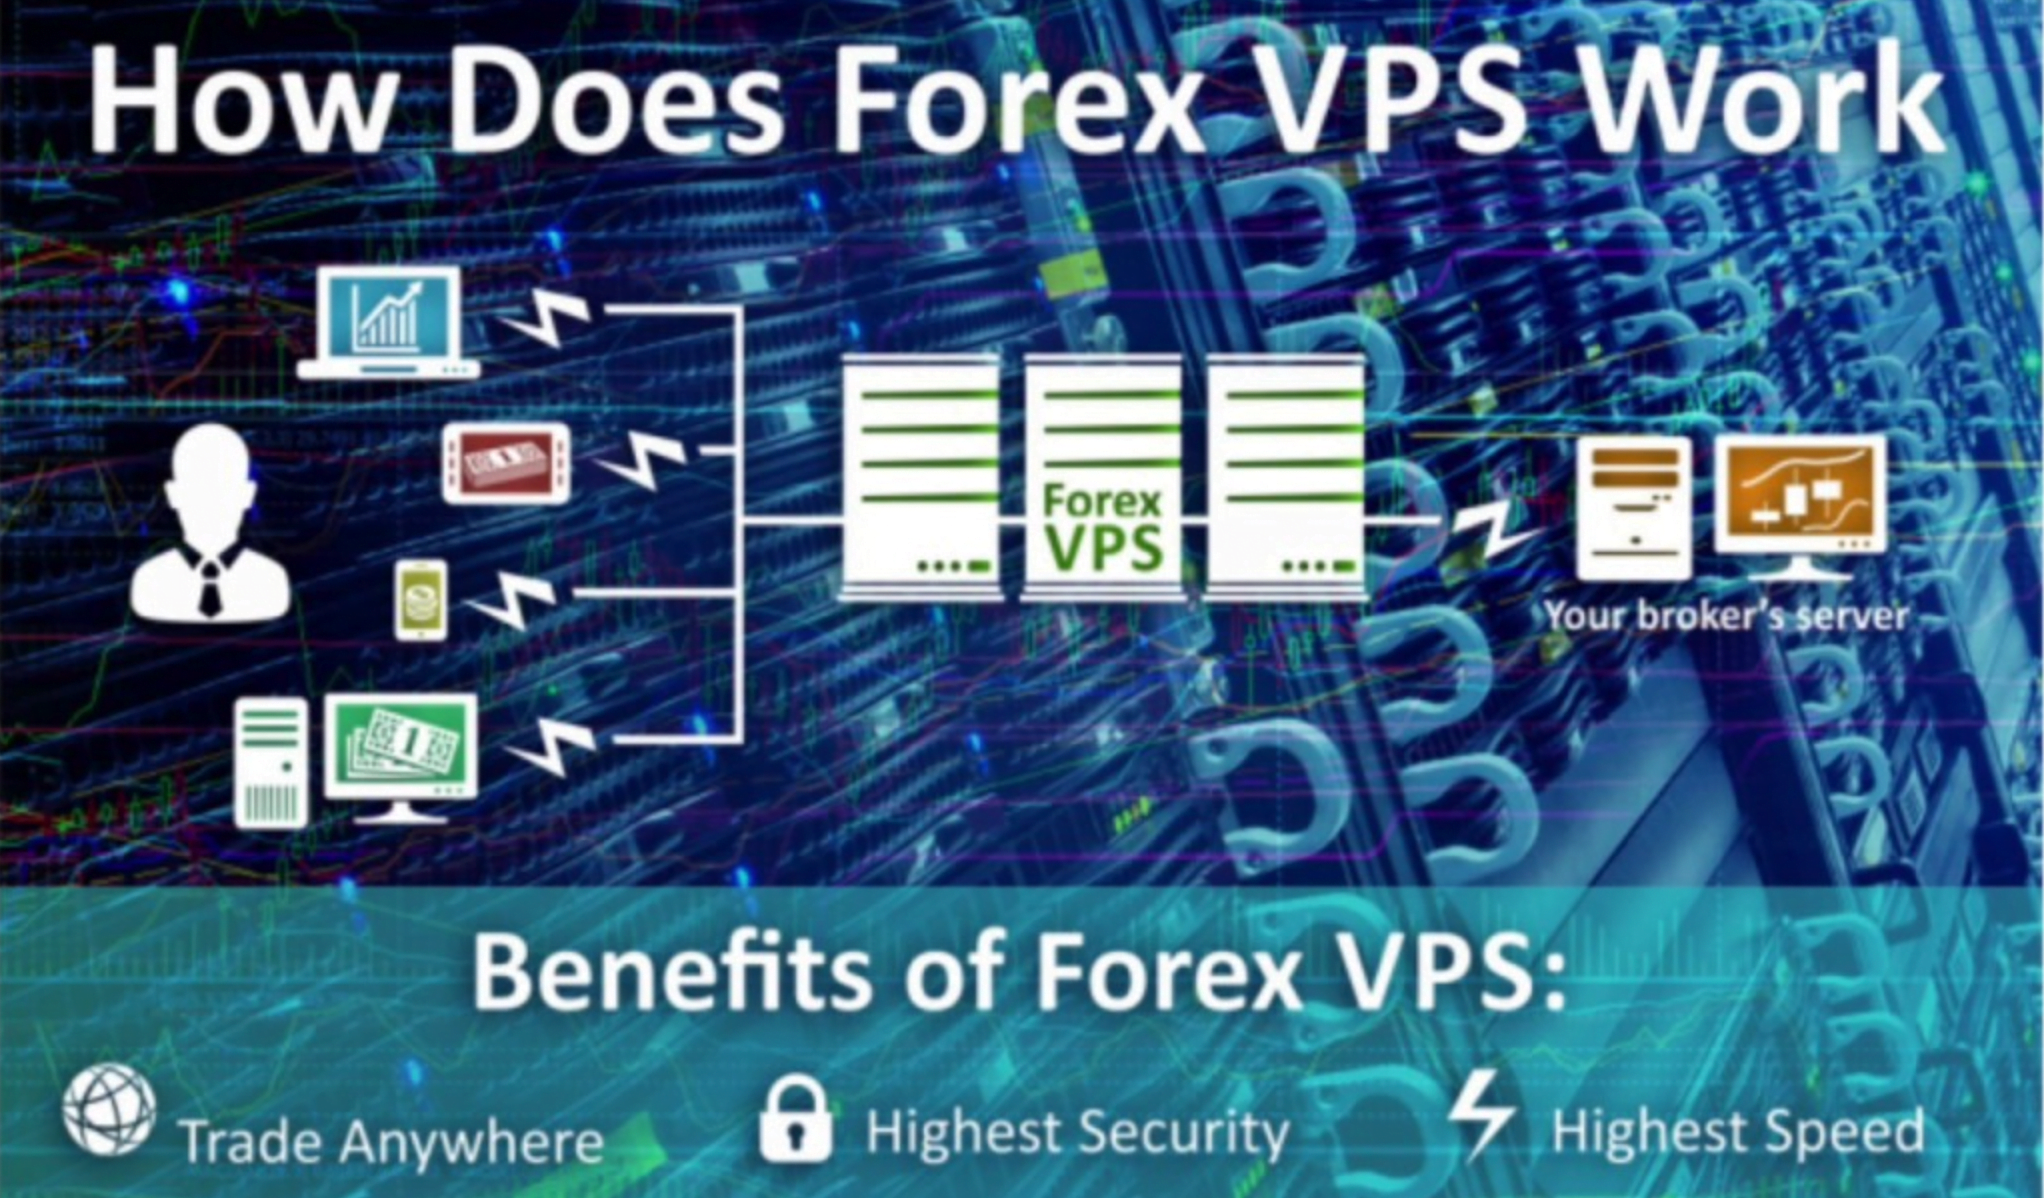 Windows VPS for Forex Trading - 6 Reasons to Use Windows VPS Hosting for Your Growing Website - HostNamaste